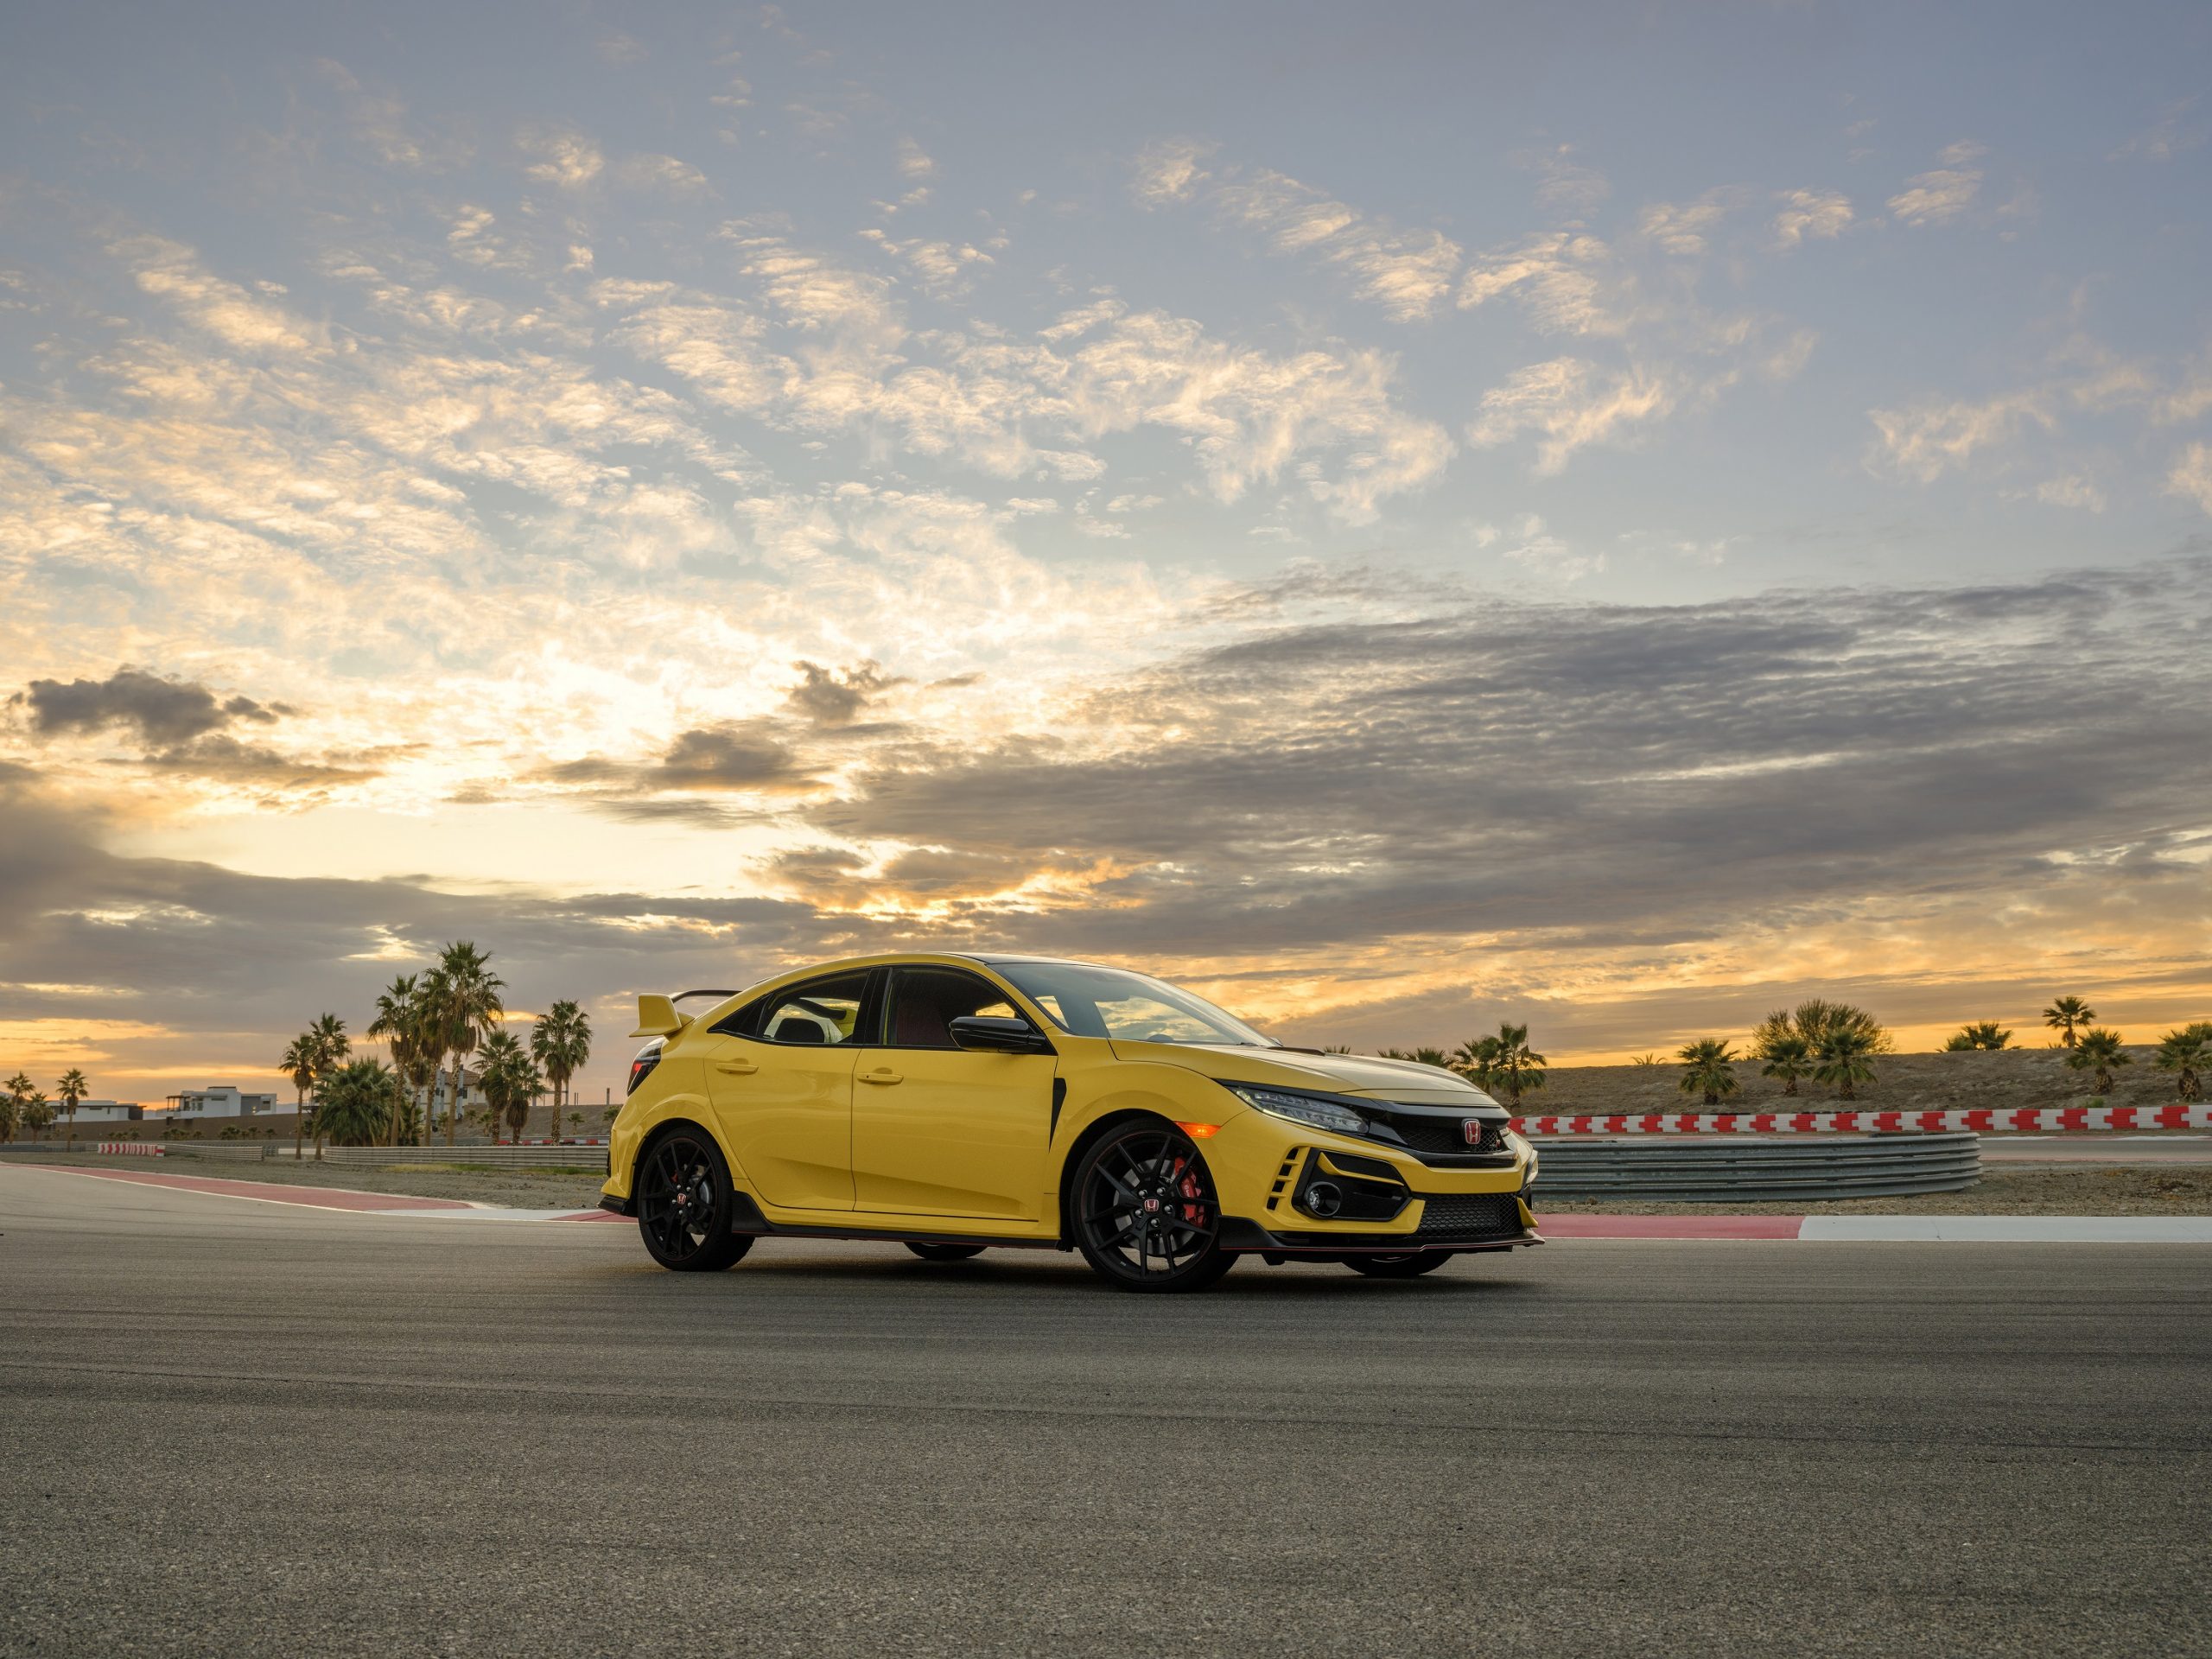 The 2021 Honda Civic Type R LE in yellow shot at sunset on a race track